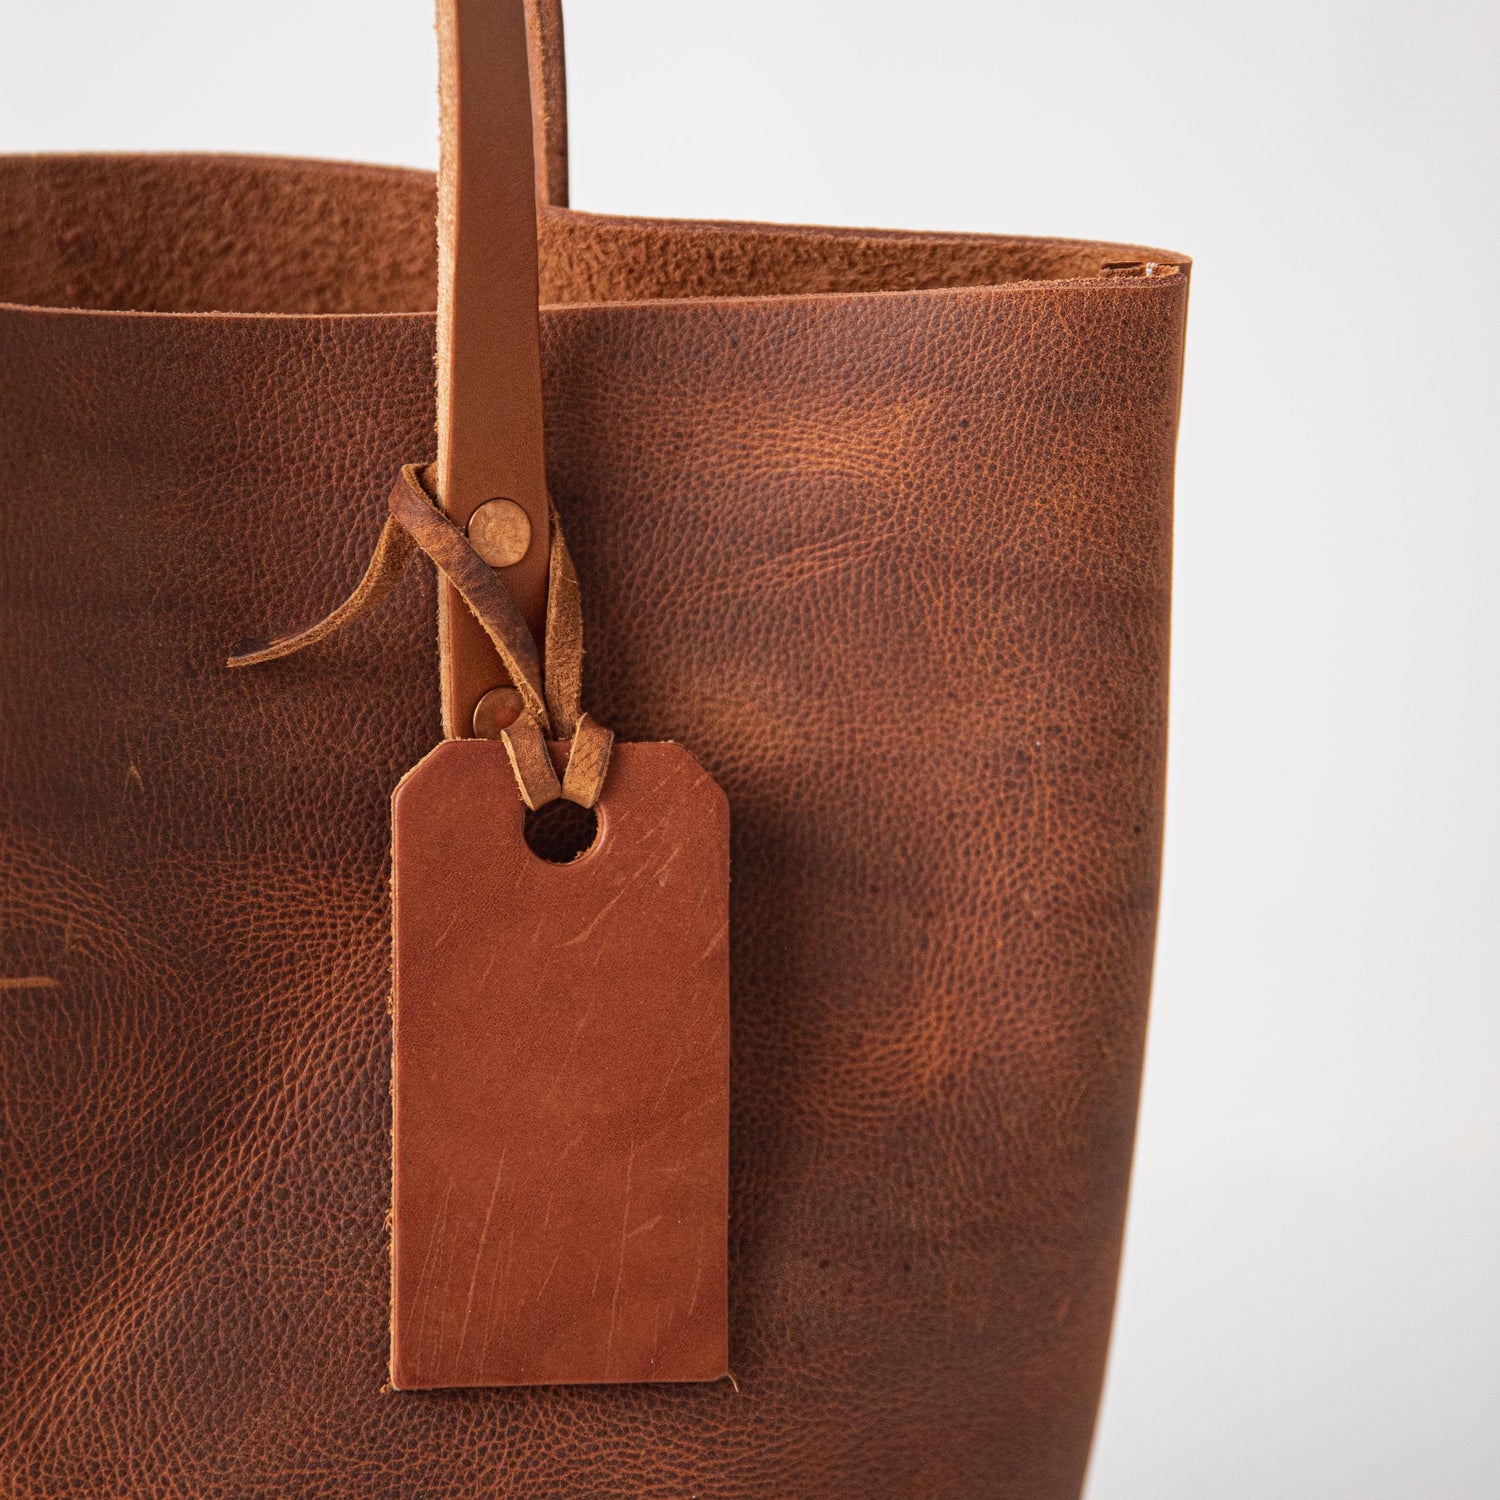 Large Brown Leather Handbag Tote, Leather Shoulder Bag, Leather Bag, Leather  Purse, by the Leather Store 